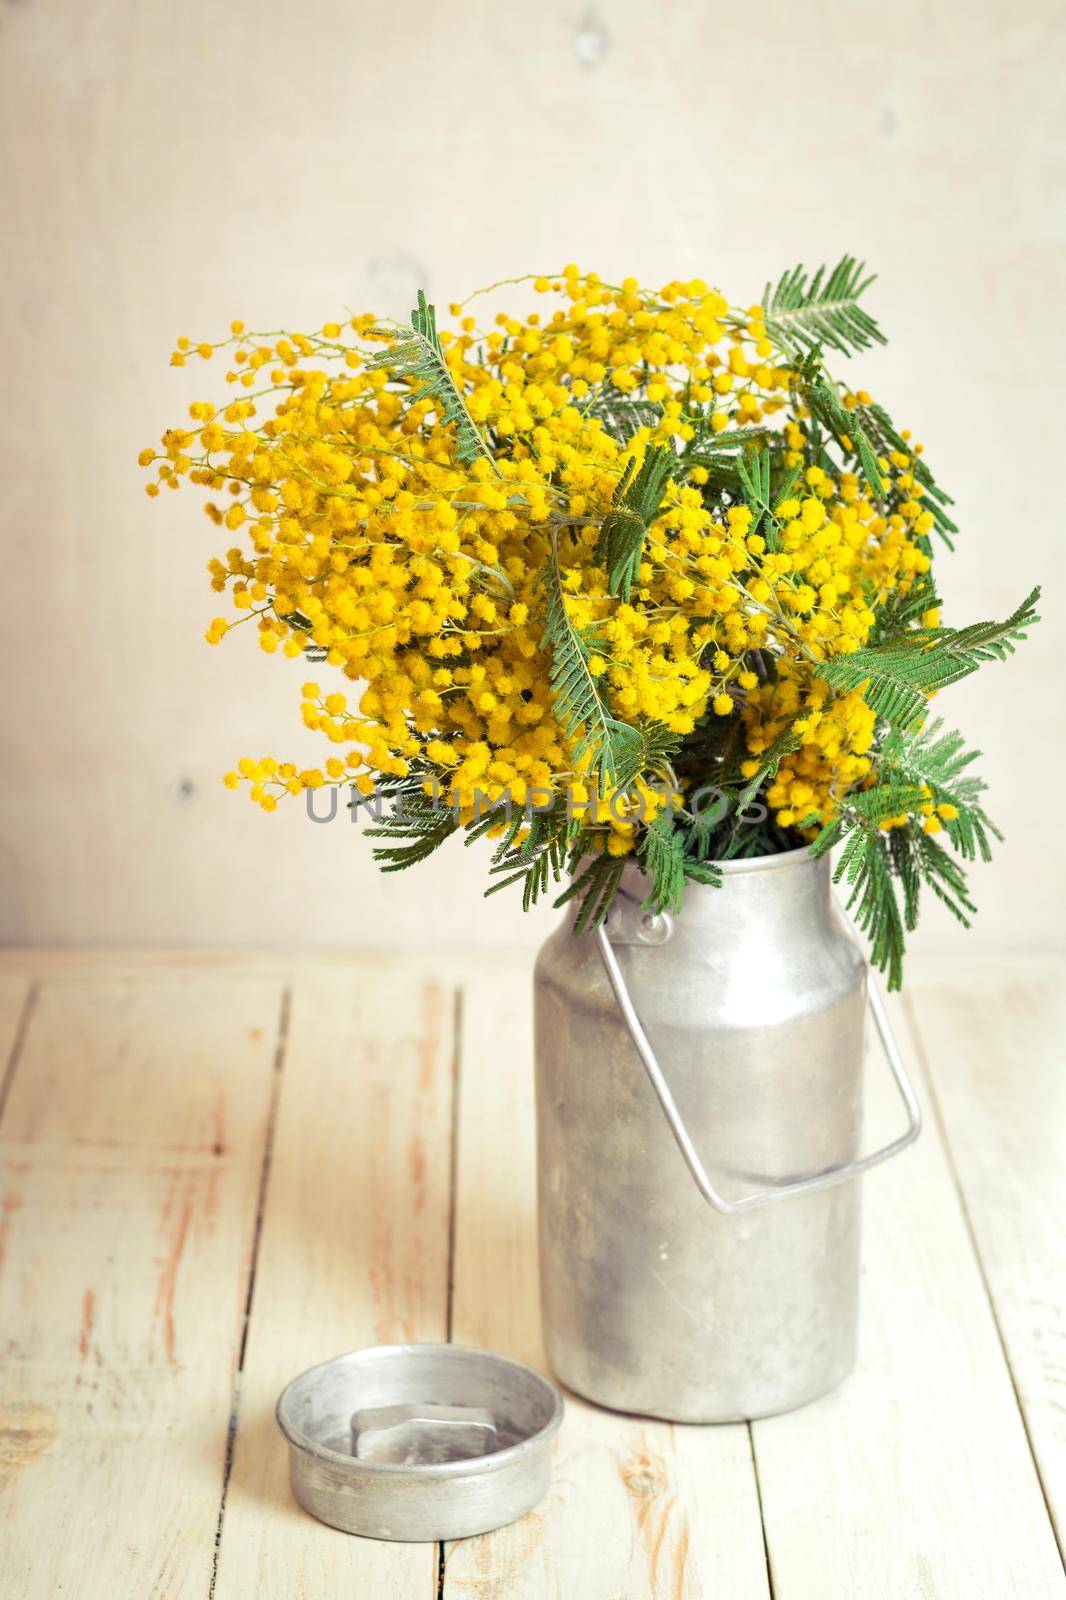 Mimosa flowers in a vintage metal milk can on the rustic white wooden background. Shabby chic style decoration with flowers. Selective focus. Vintage retro toned